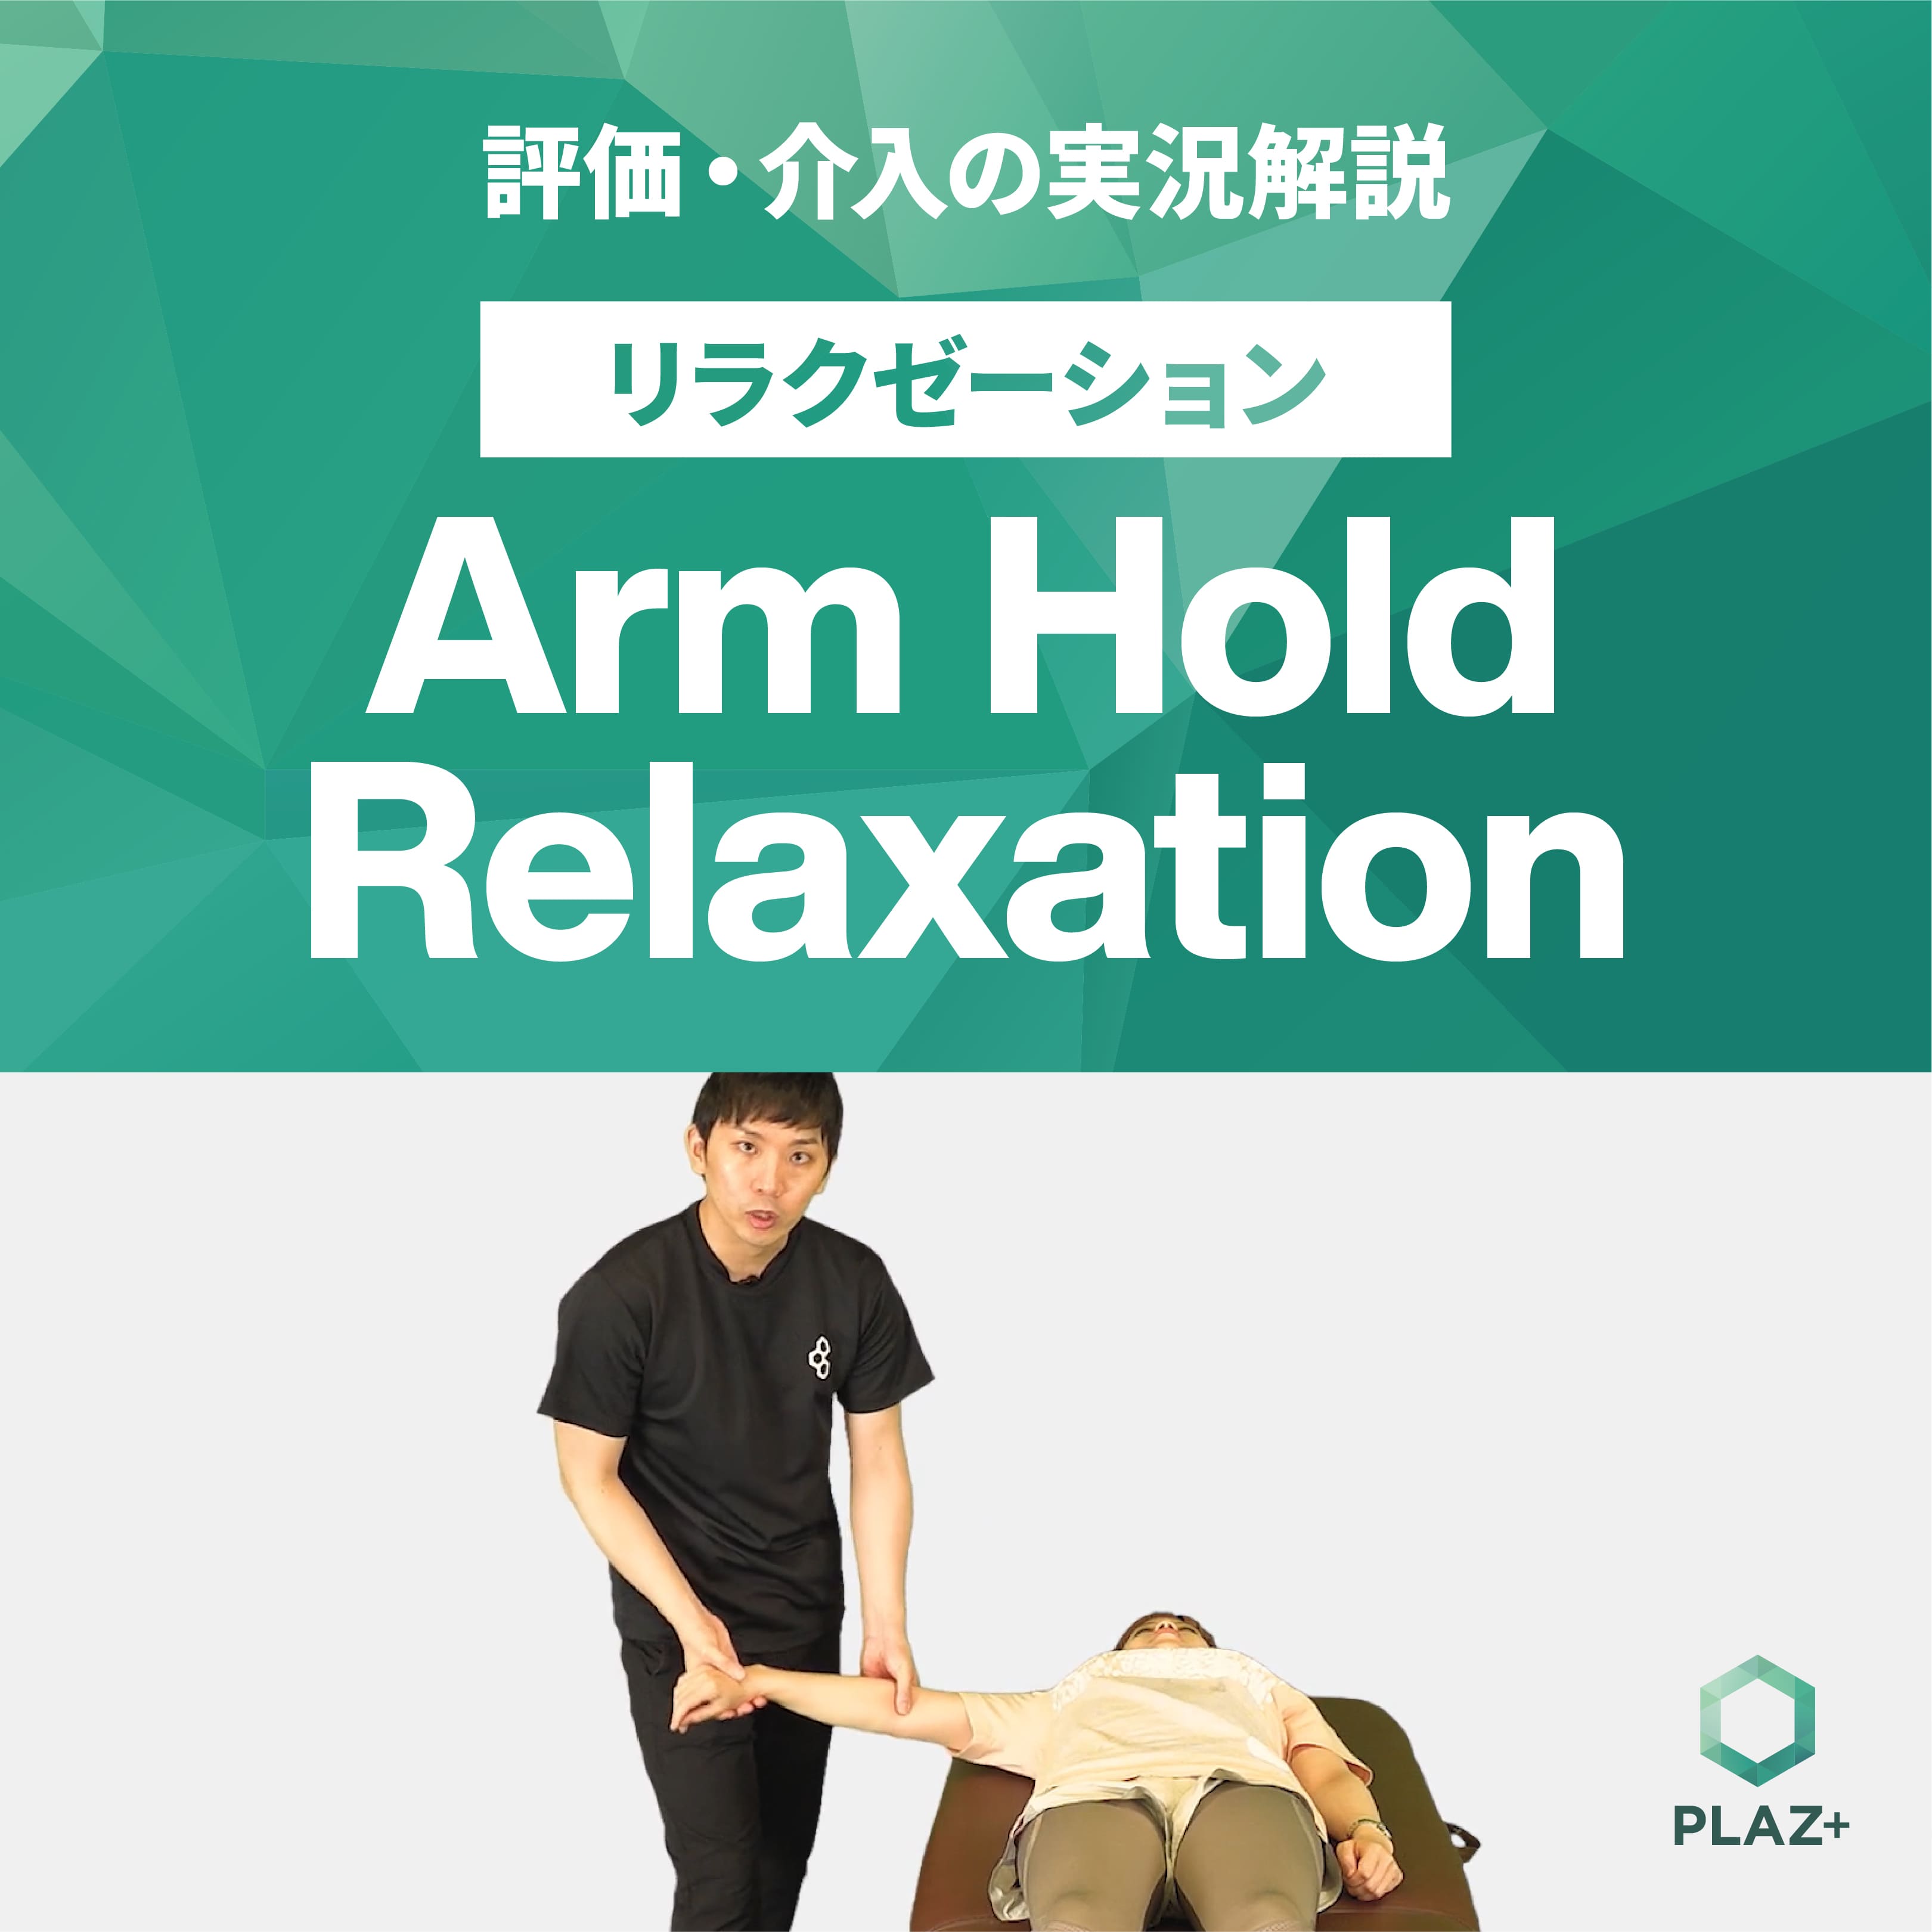 ArmHold Relaxation